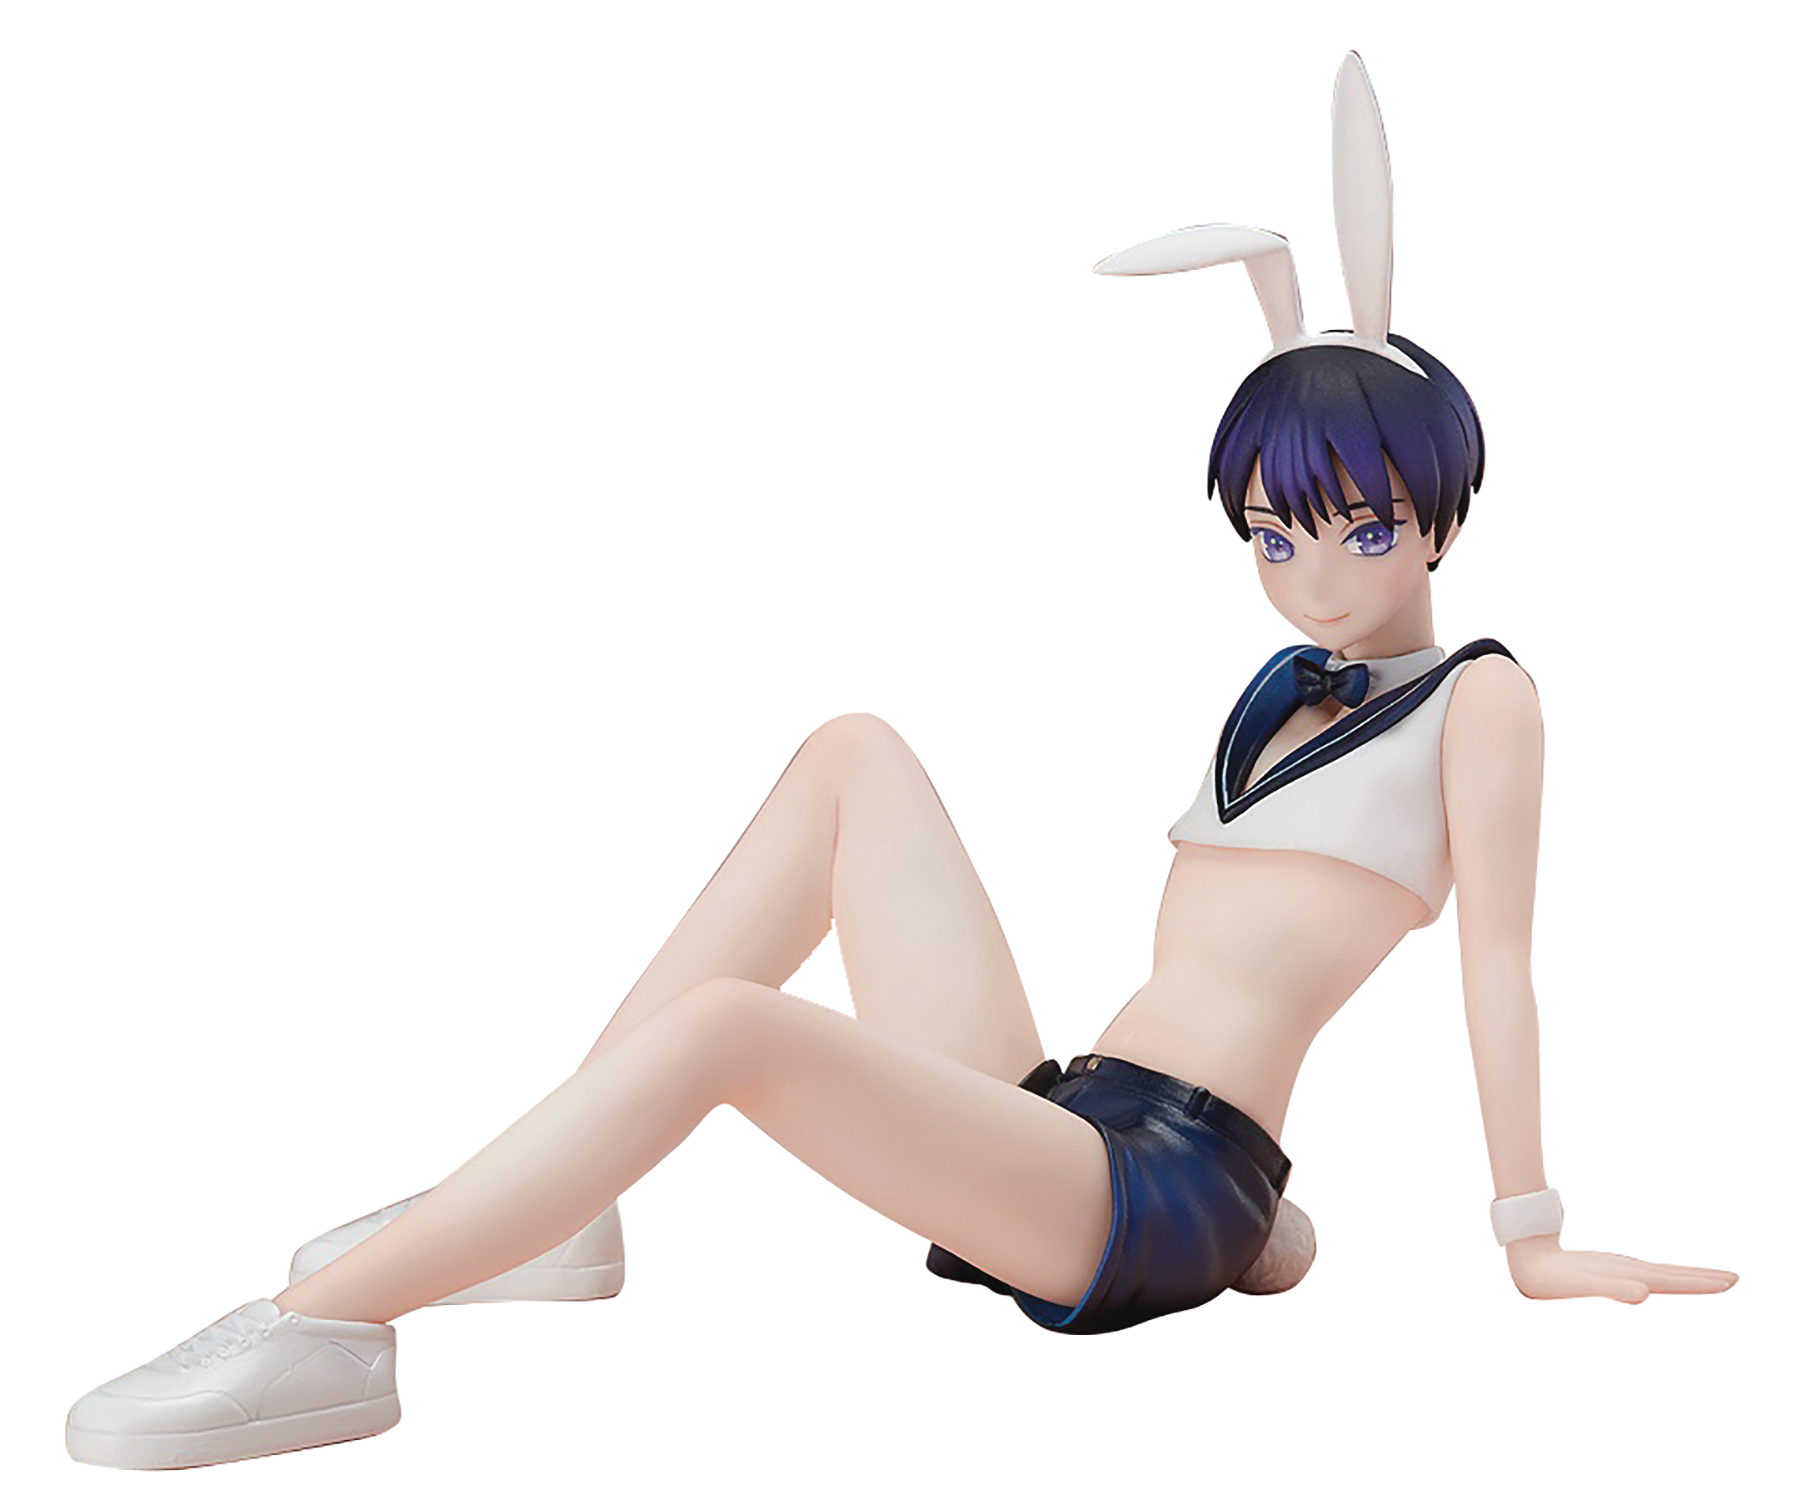 Introducing a handheld size figure of BunnyBOY Black, from BINDing's o...